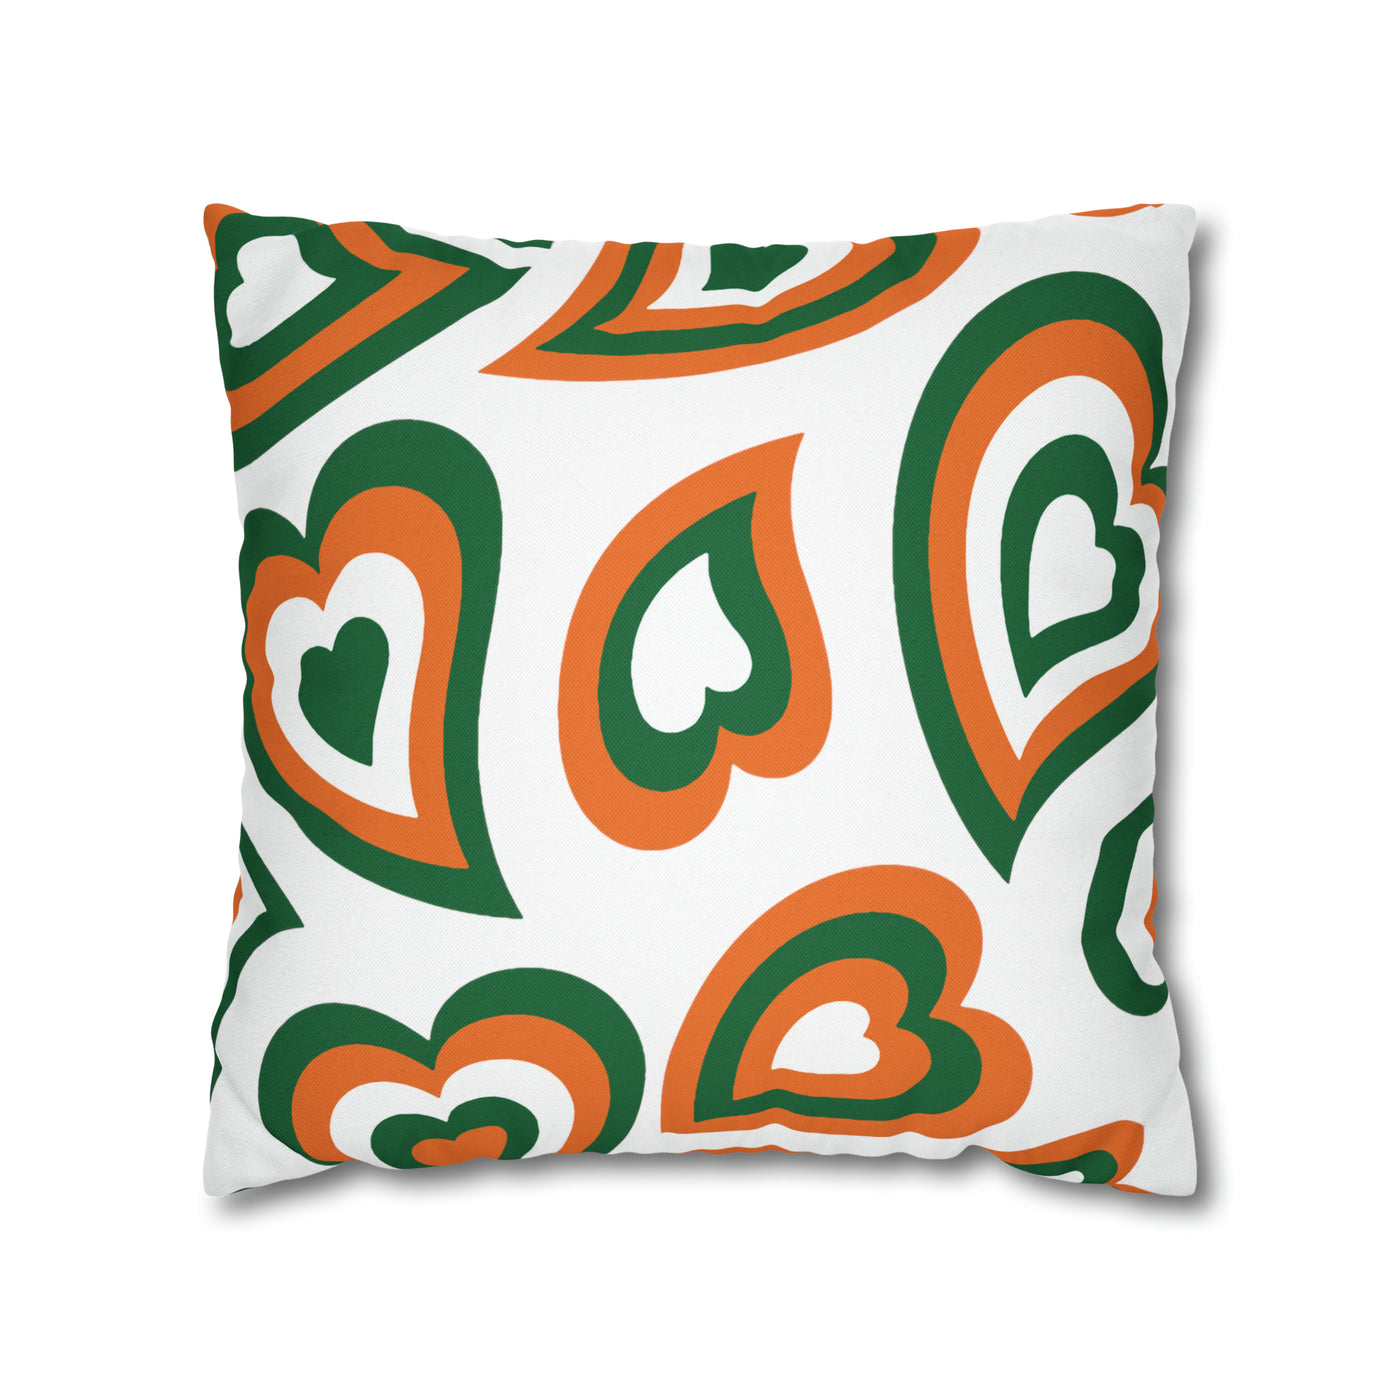 Retro Heart Pillow - Green and Orange, Heart Pillow, Hearts, Valentine's Day, Miami Hurricanes, Bed Party Pillow, Sleepaway Camp Pillow,Camp